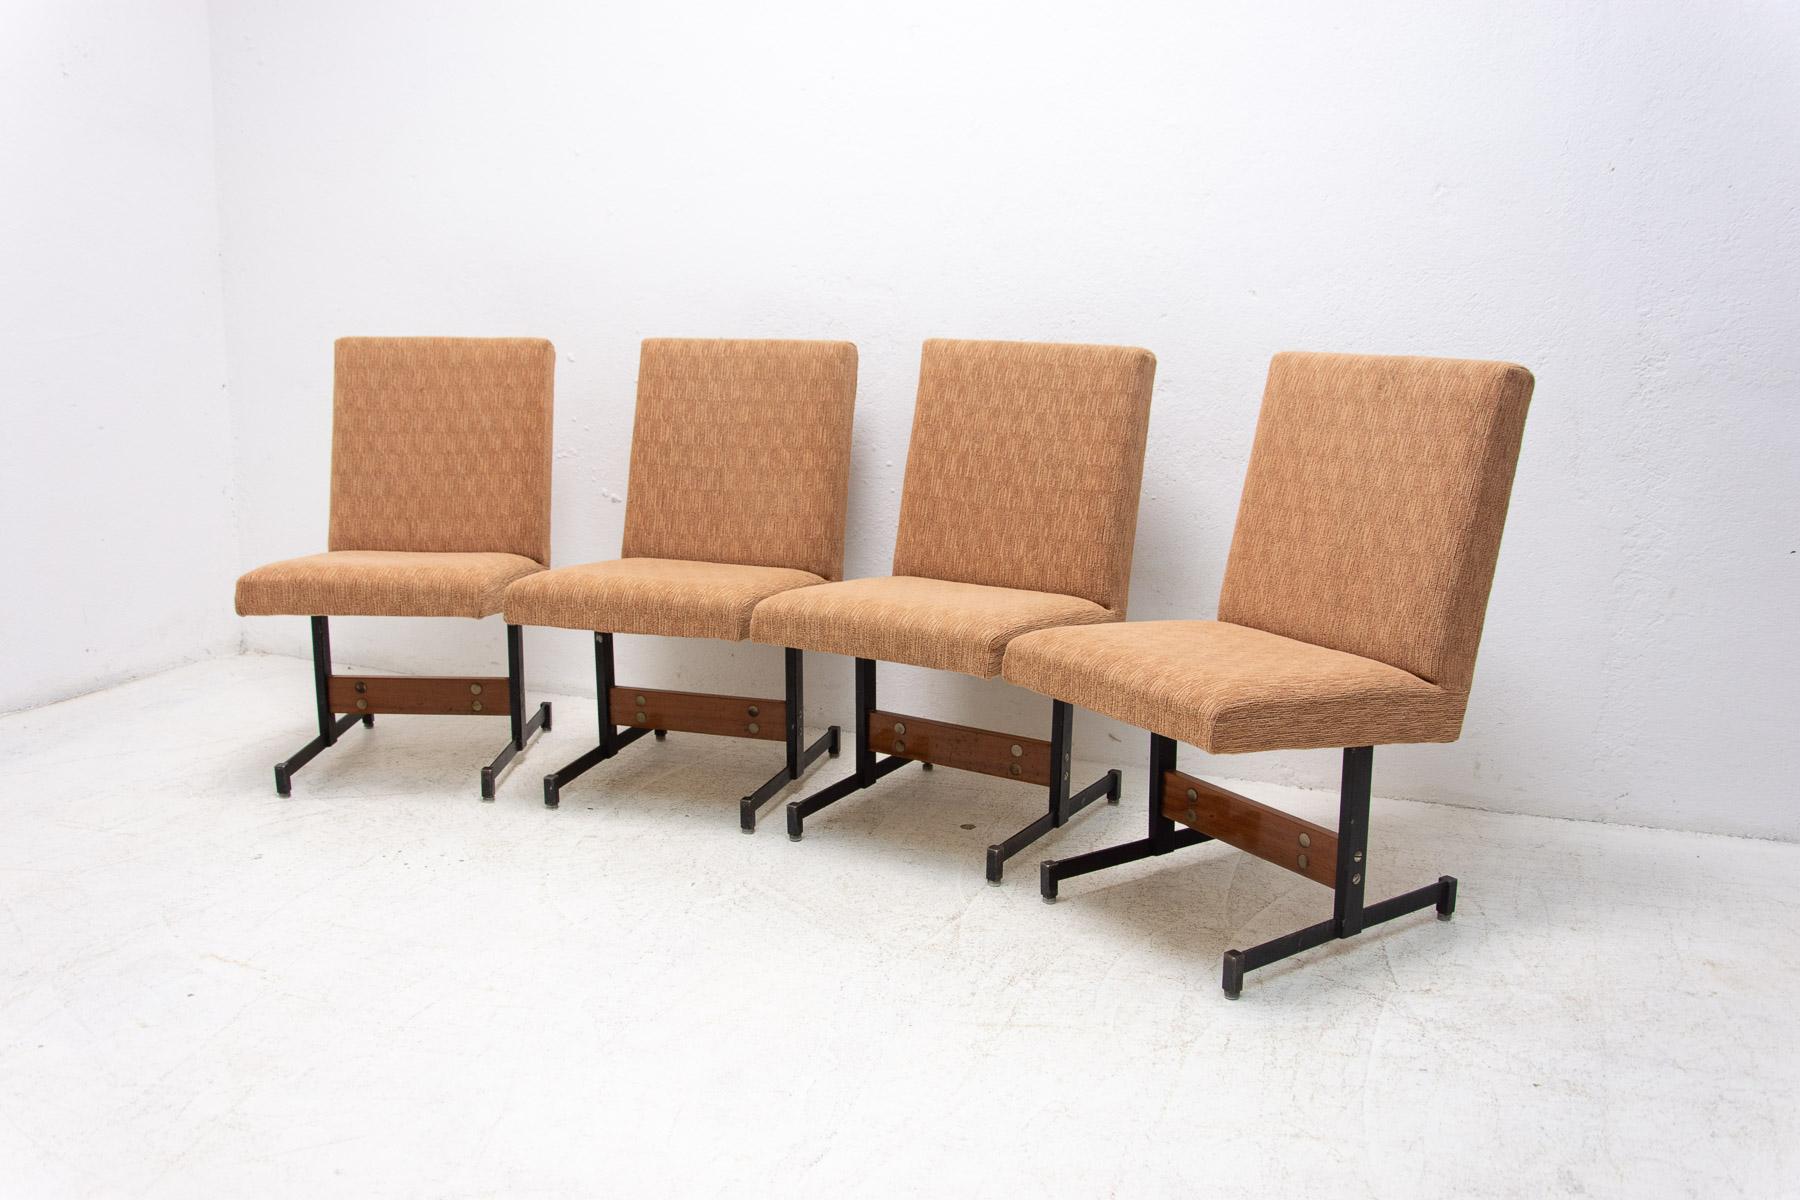 20th Century Vintage Dining Chairs, 1970's, Czechoslovakia, Set of 4